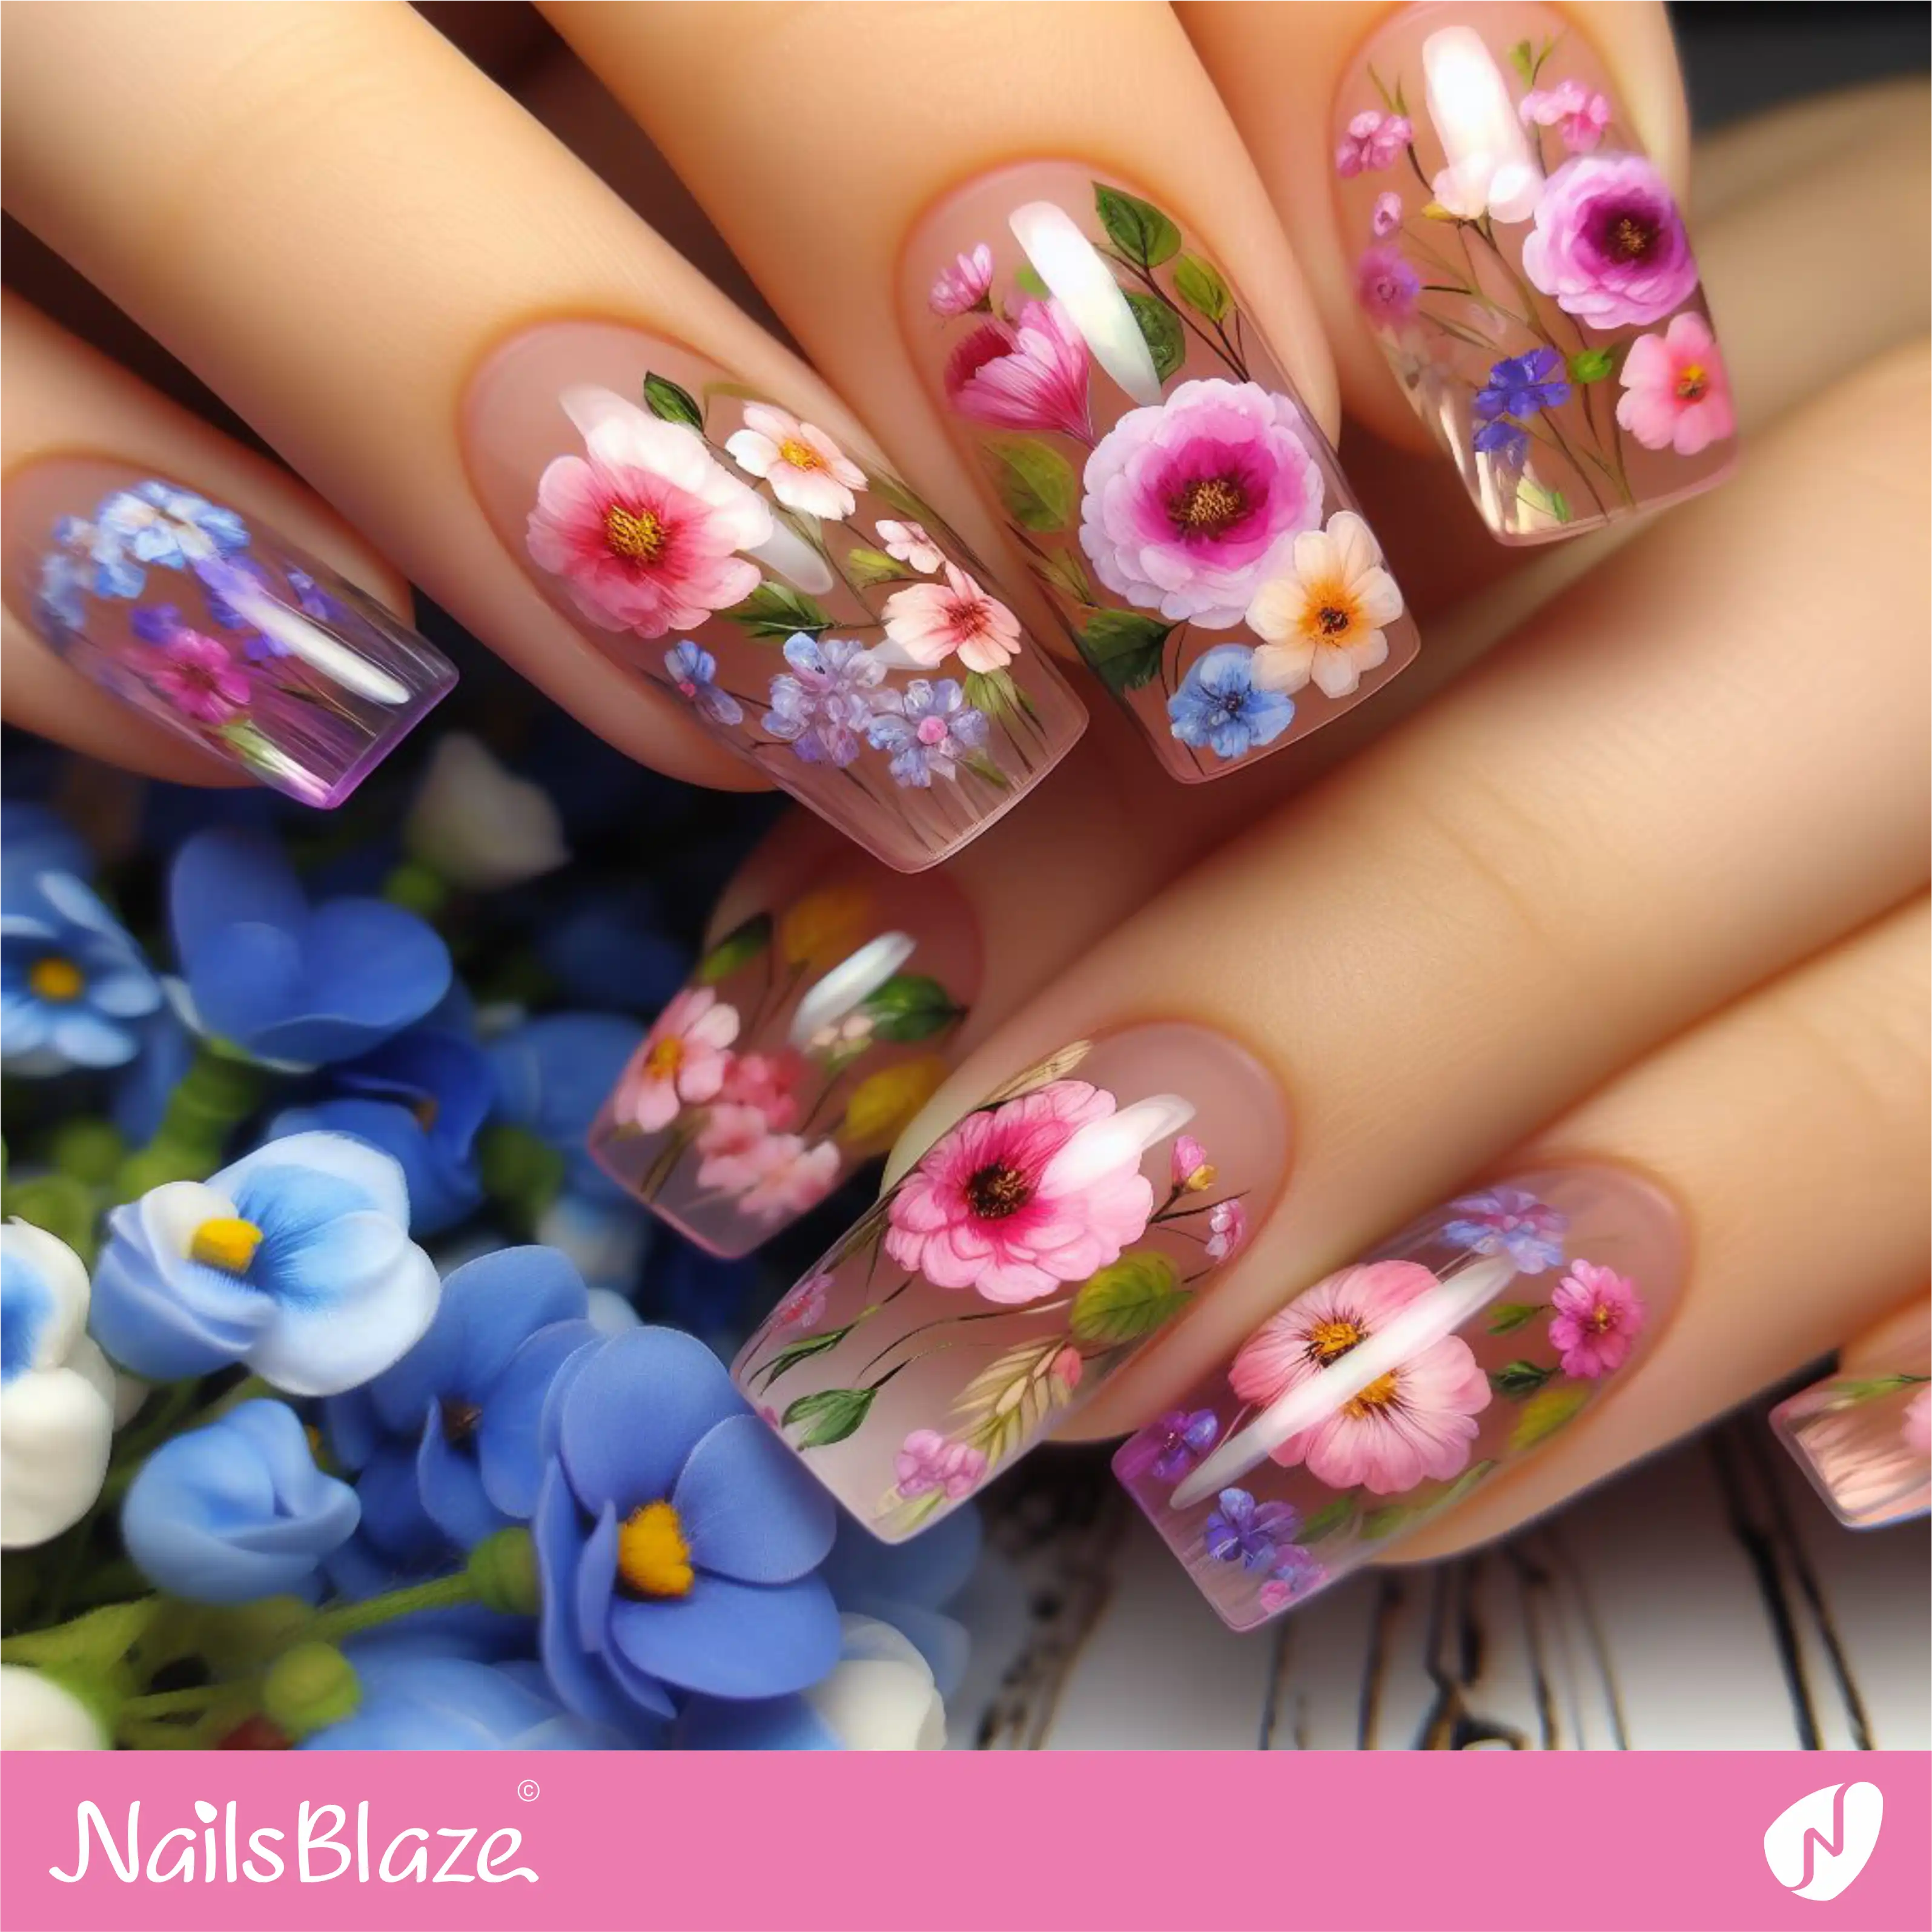 Transparent Nails with Watercolor Flowers | Paint Nail Art - NB2277